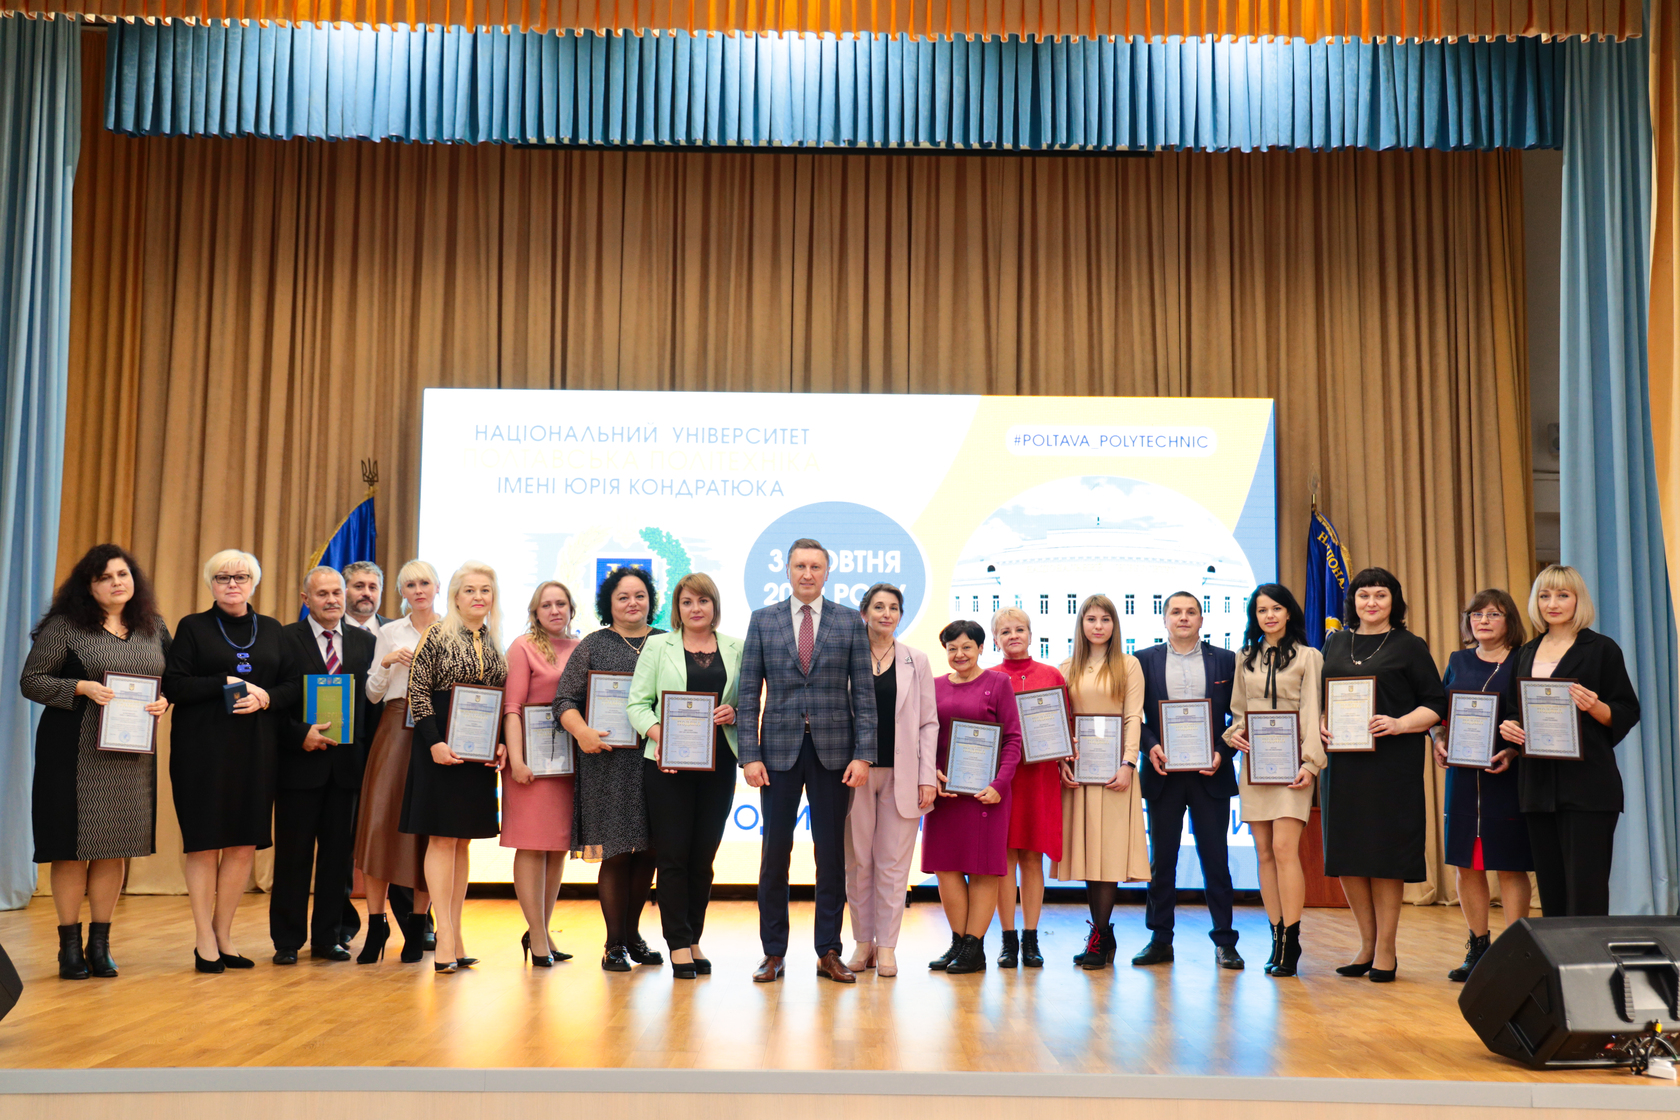 Poltava College of Oil and Gas celebrates its double anniversary